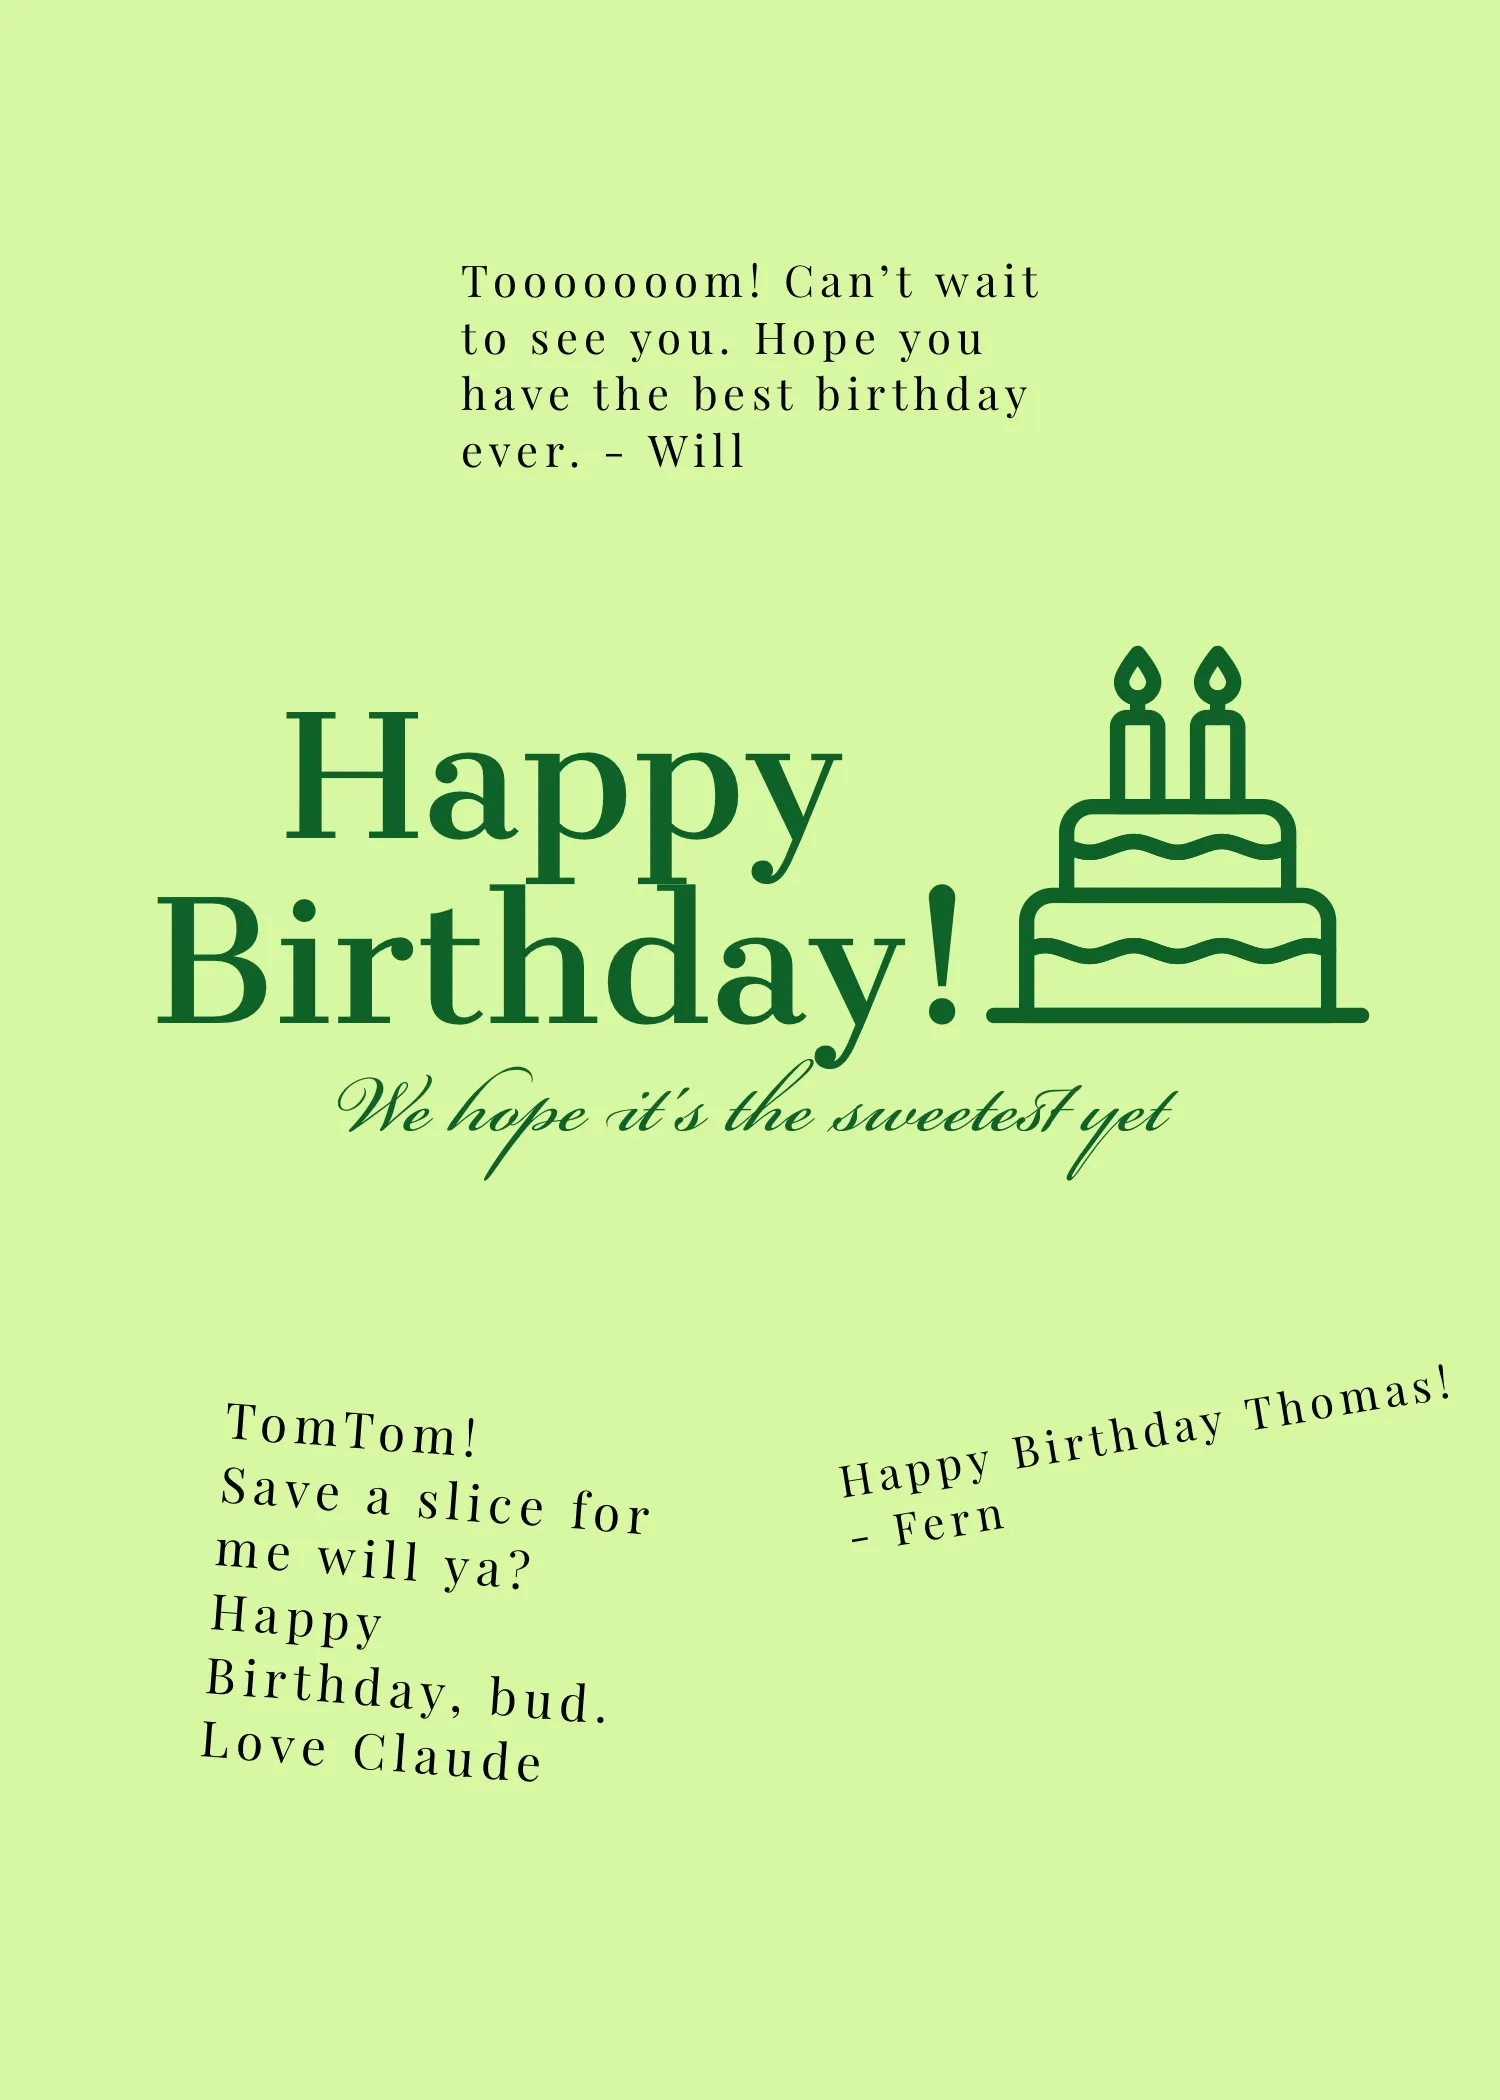 Green Shareable Group Birthday Card